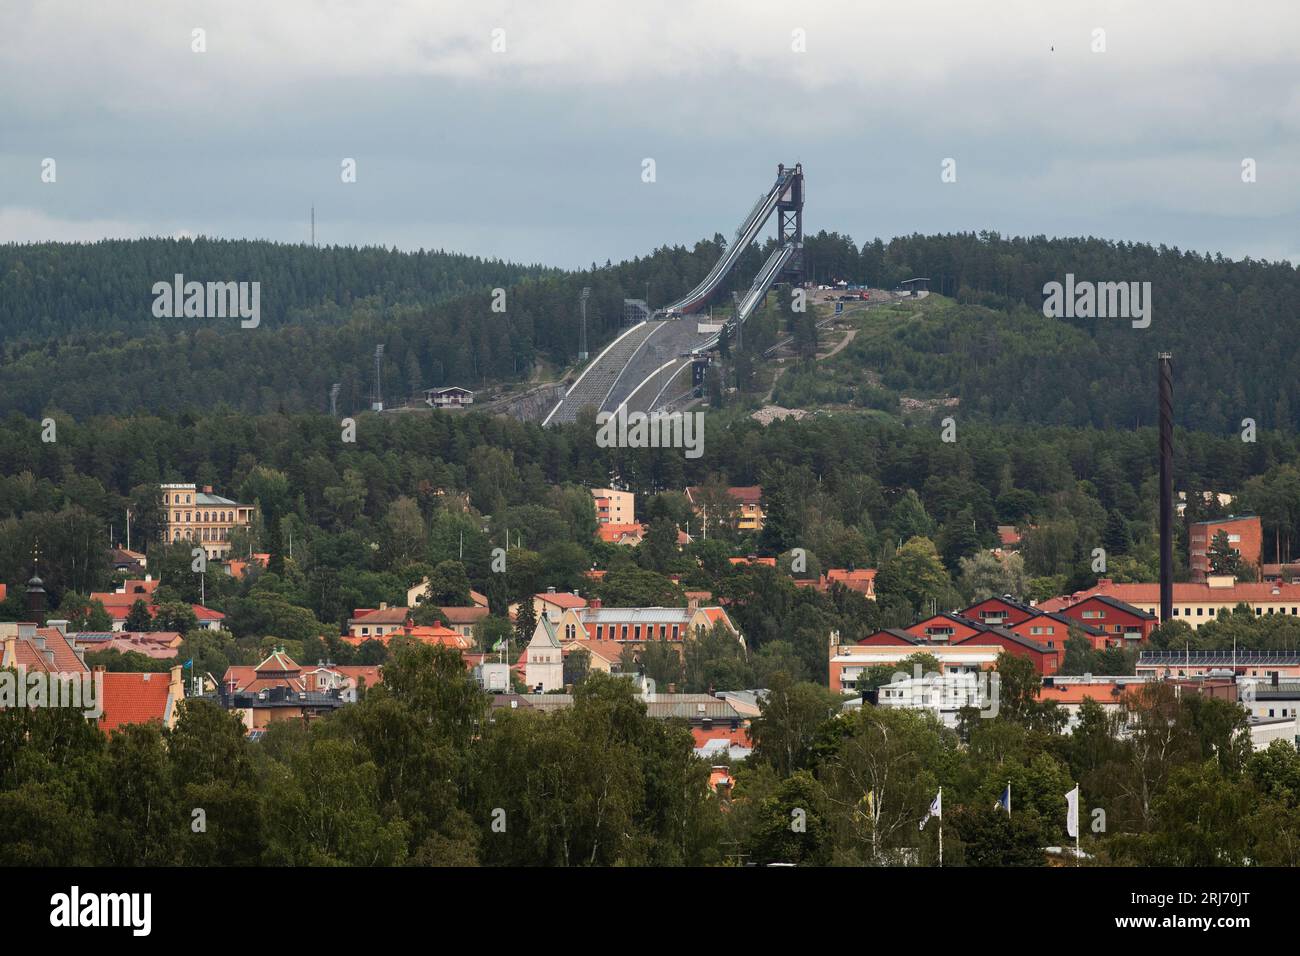 Lugnet is a large sport complex located in Falun, Sweden. In the picture: Lugnet HS134 is a large ski jumping hill. Stock Photo